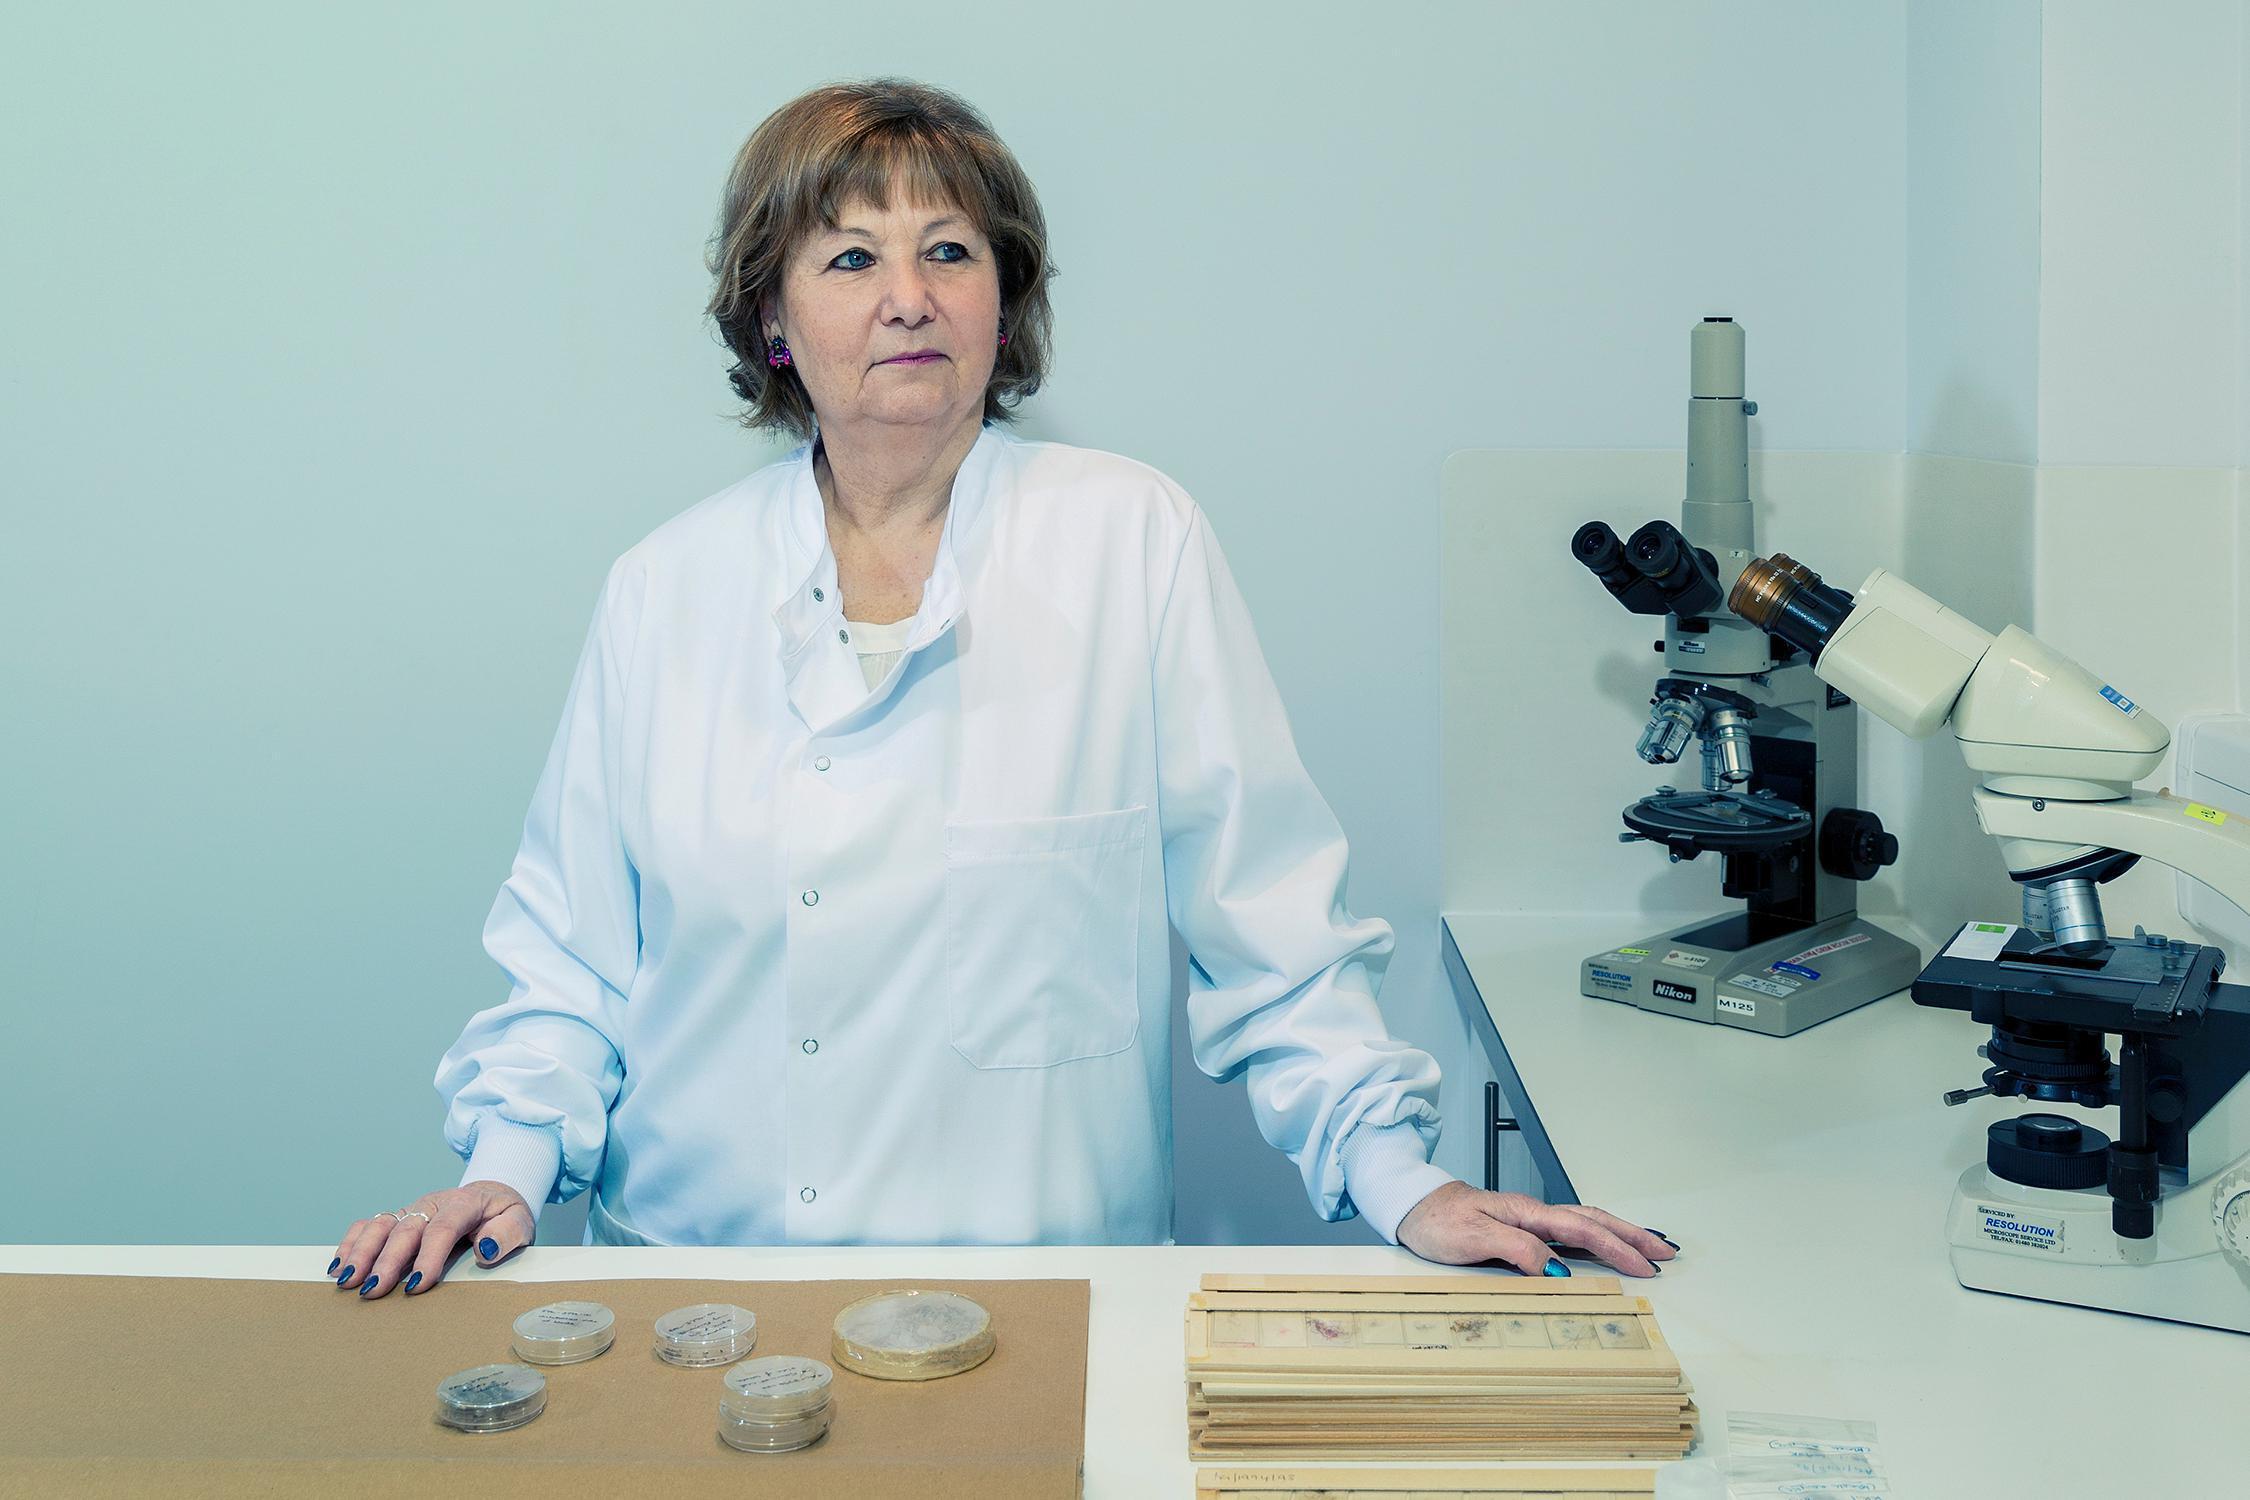 How to Solve a Crime: Stories from the Cutting Edge of Forensics with Angela Gallop